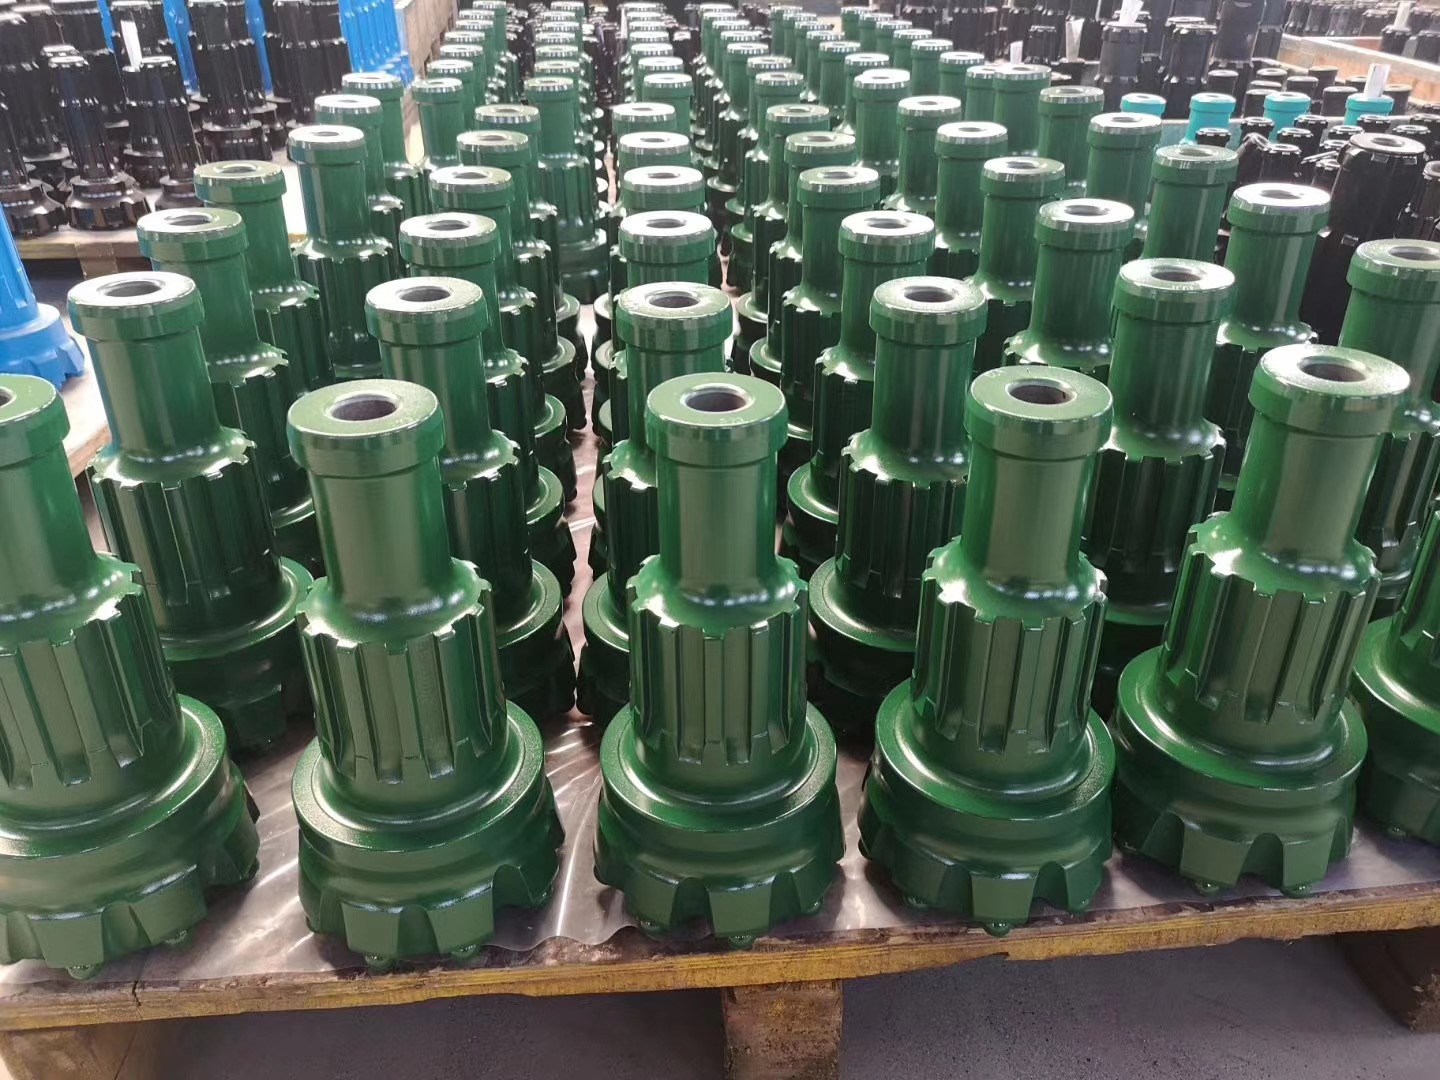 DHD Bits Dth Hammer Button Bits DTH Drill Bits Manufacturers, DHD Bits Dth Hammer Button Bits DTH Drill Bits Factory, Supply DHD Bits Dth Hammer Button Bits DTH Drill Bits